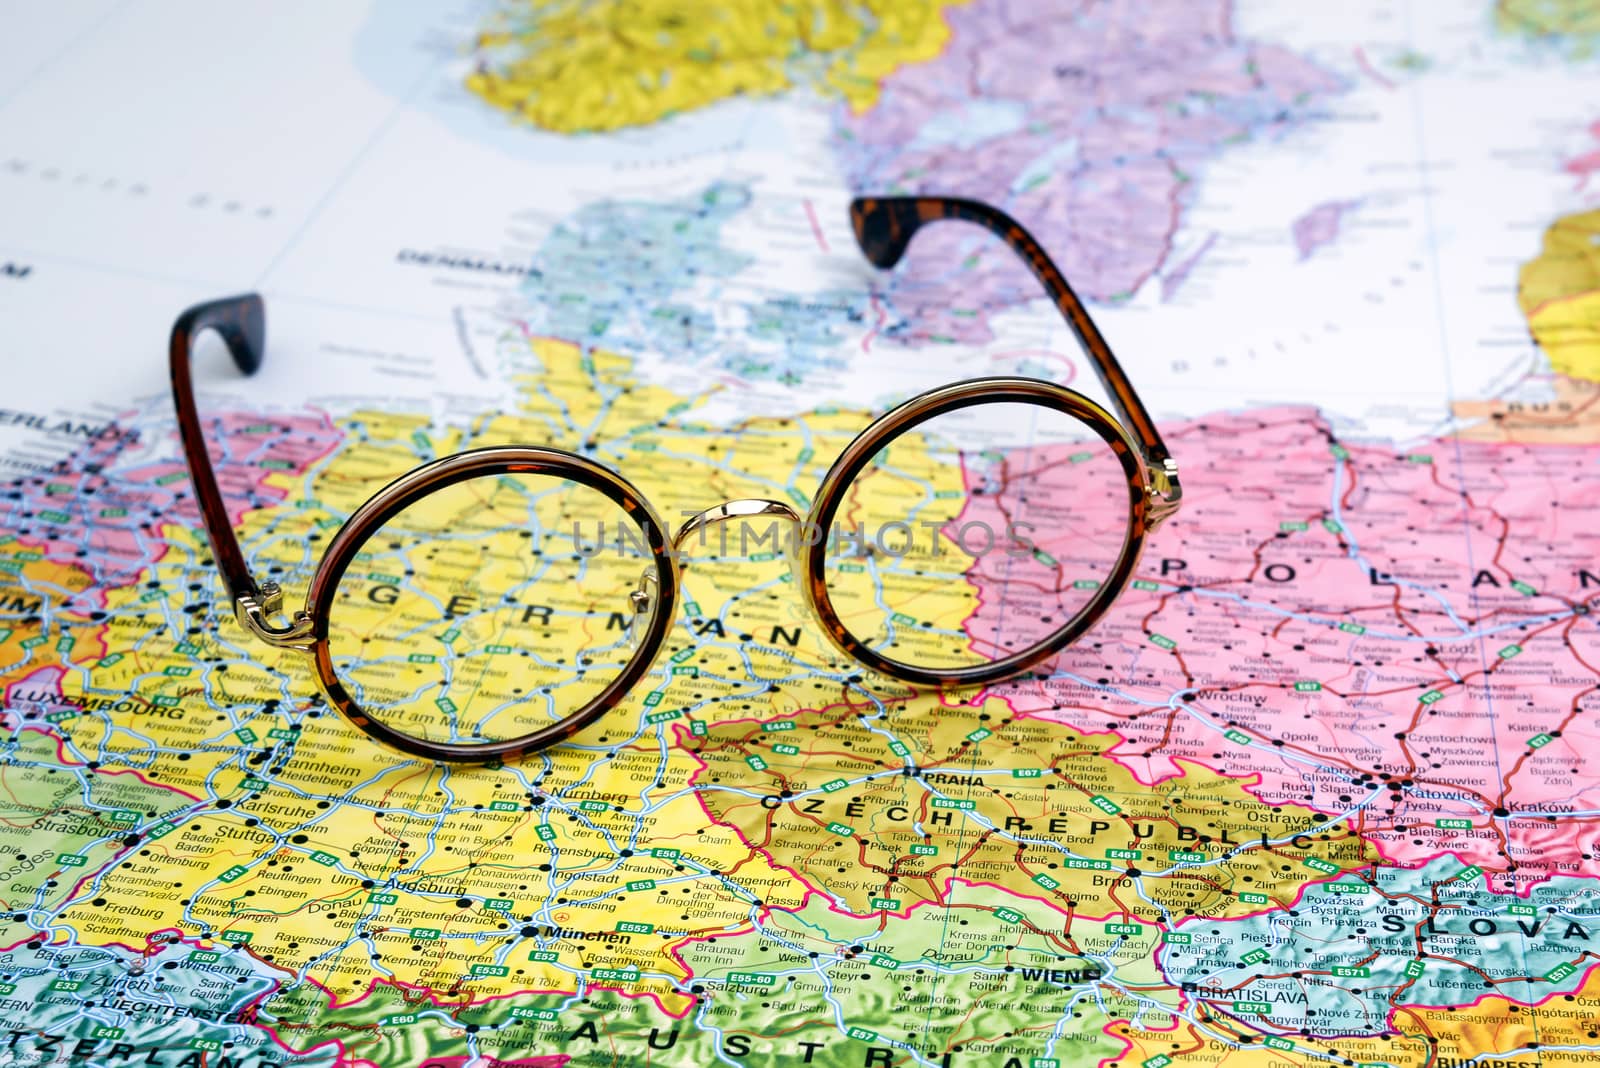 Photo of glasses on a map of europe. Focus on Germany. May be used as illustration for traveling theme.